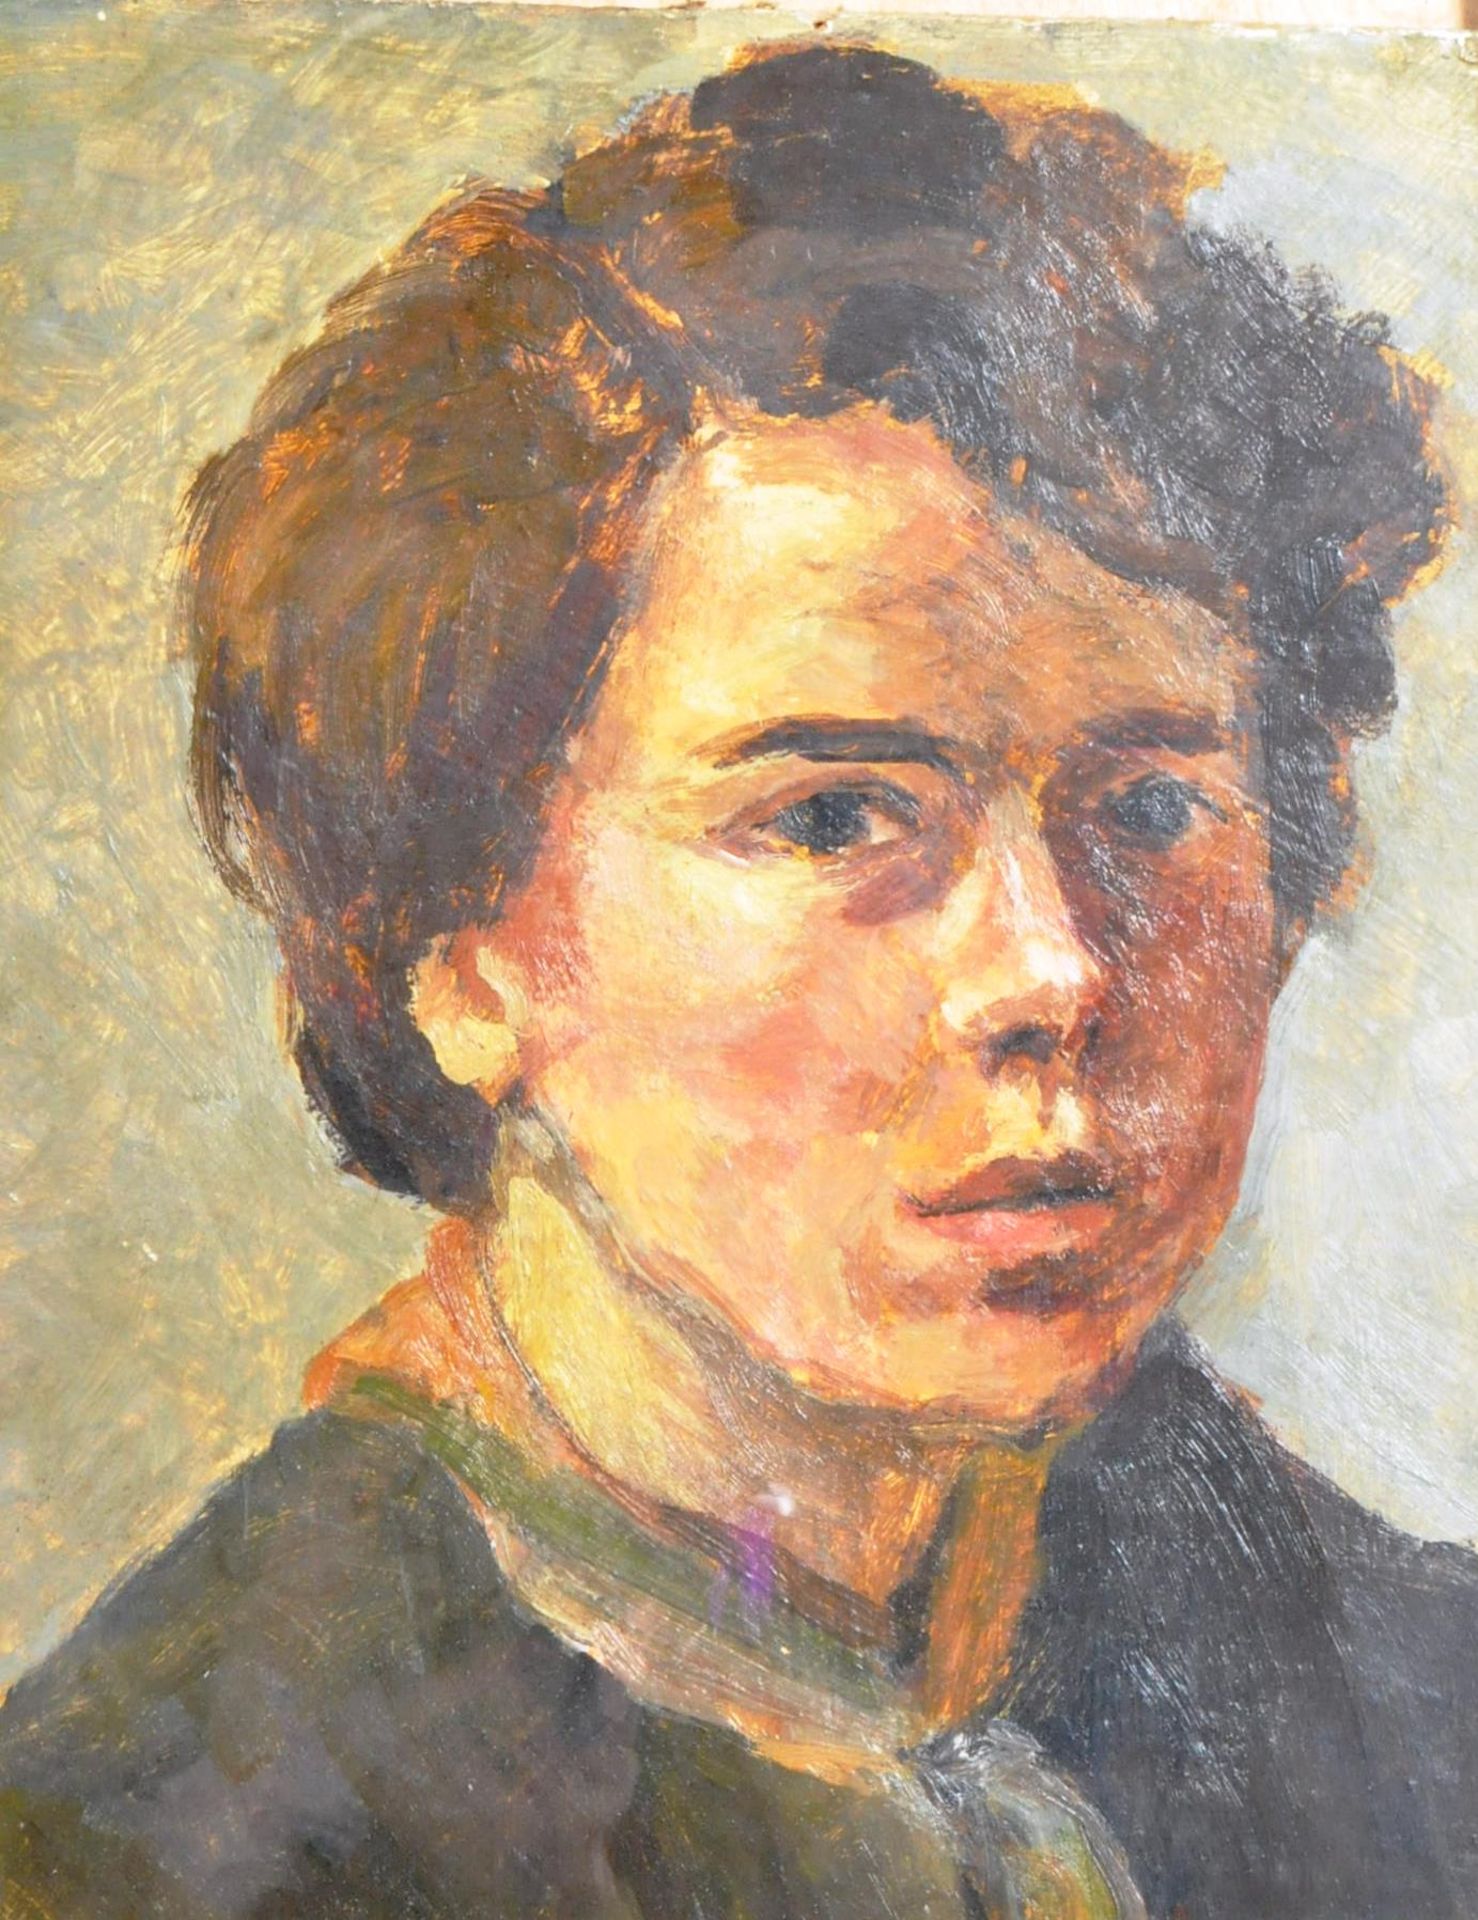 MID 20TH CENTURY OIL ON BOARD PORTRAIT PAINTING OF A YOUNG BOY - Image 3 of 6